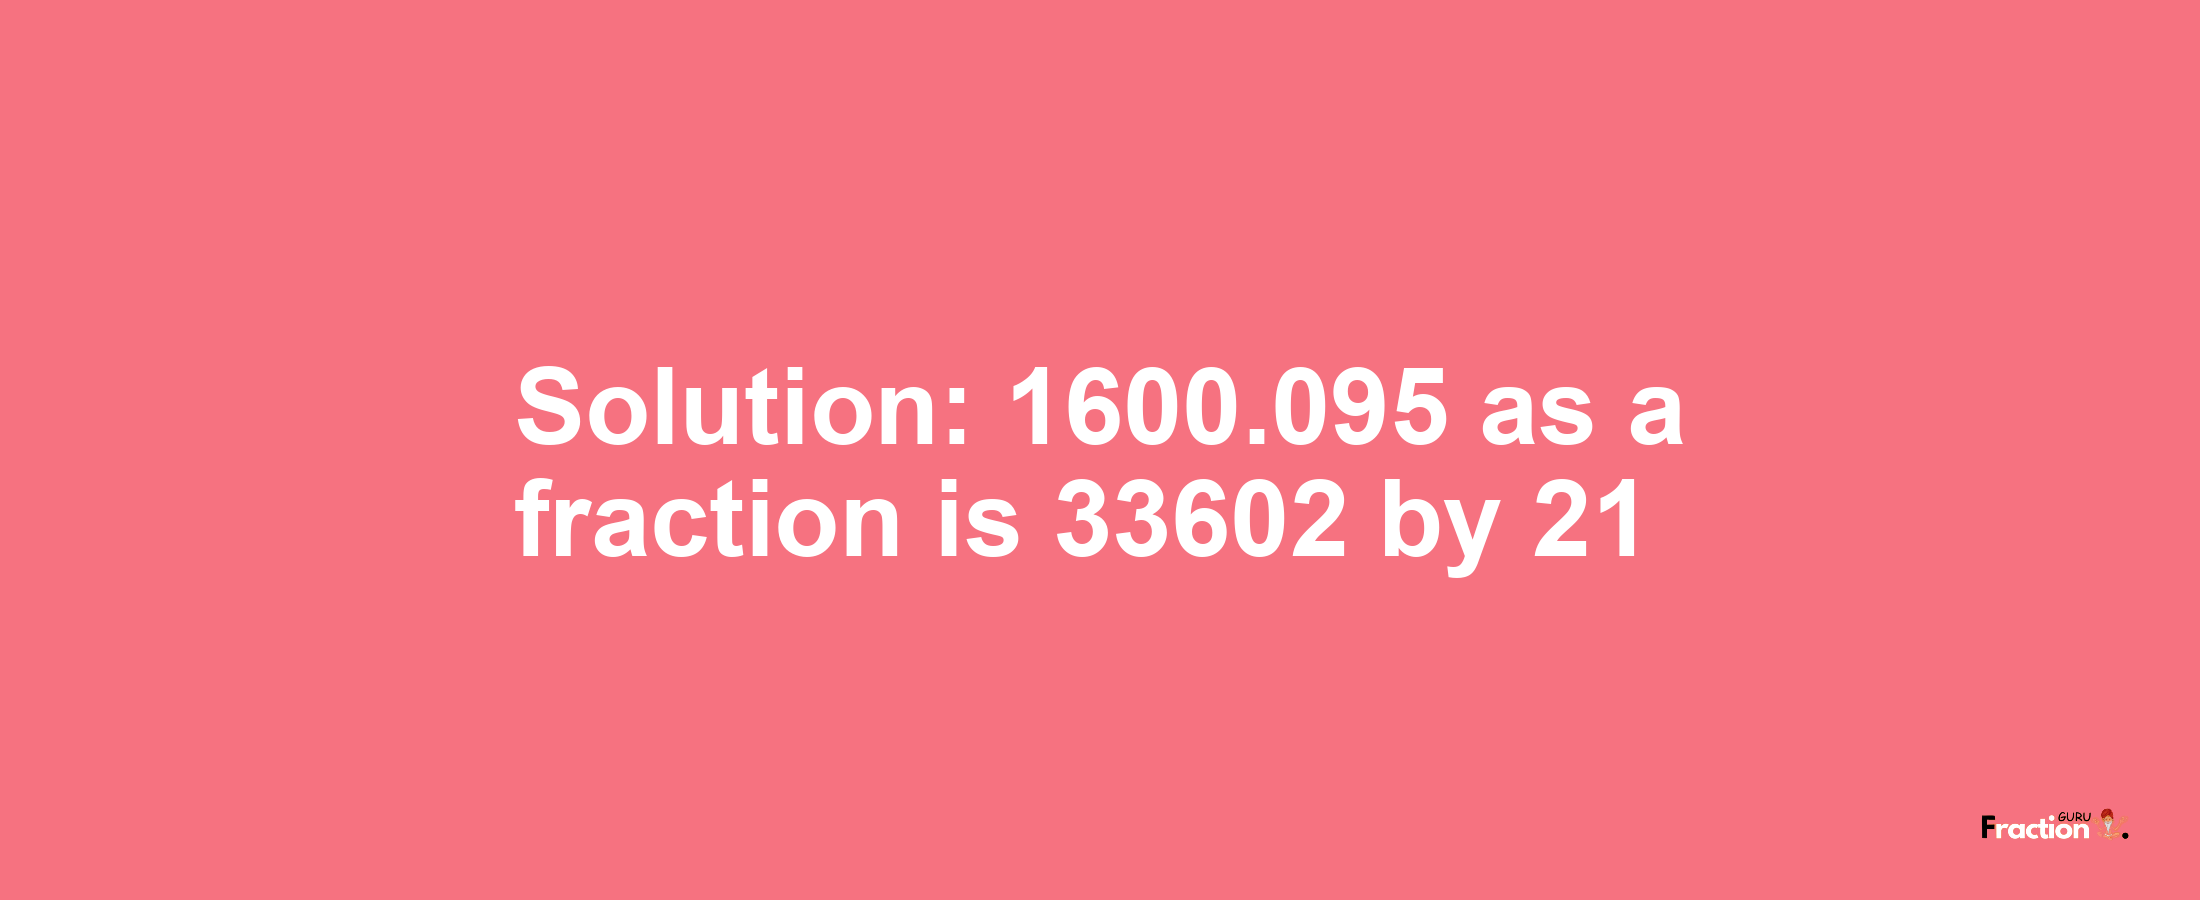 Solution:1600.095 as a fraction is 33602/21